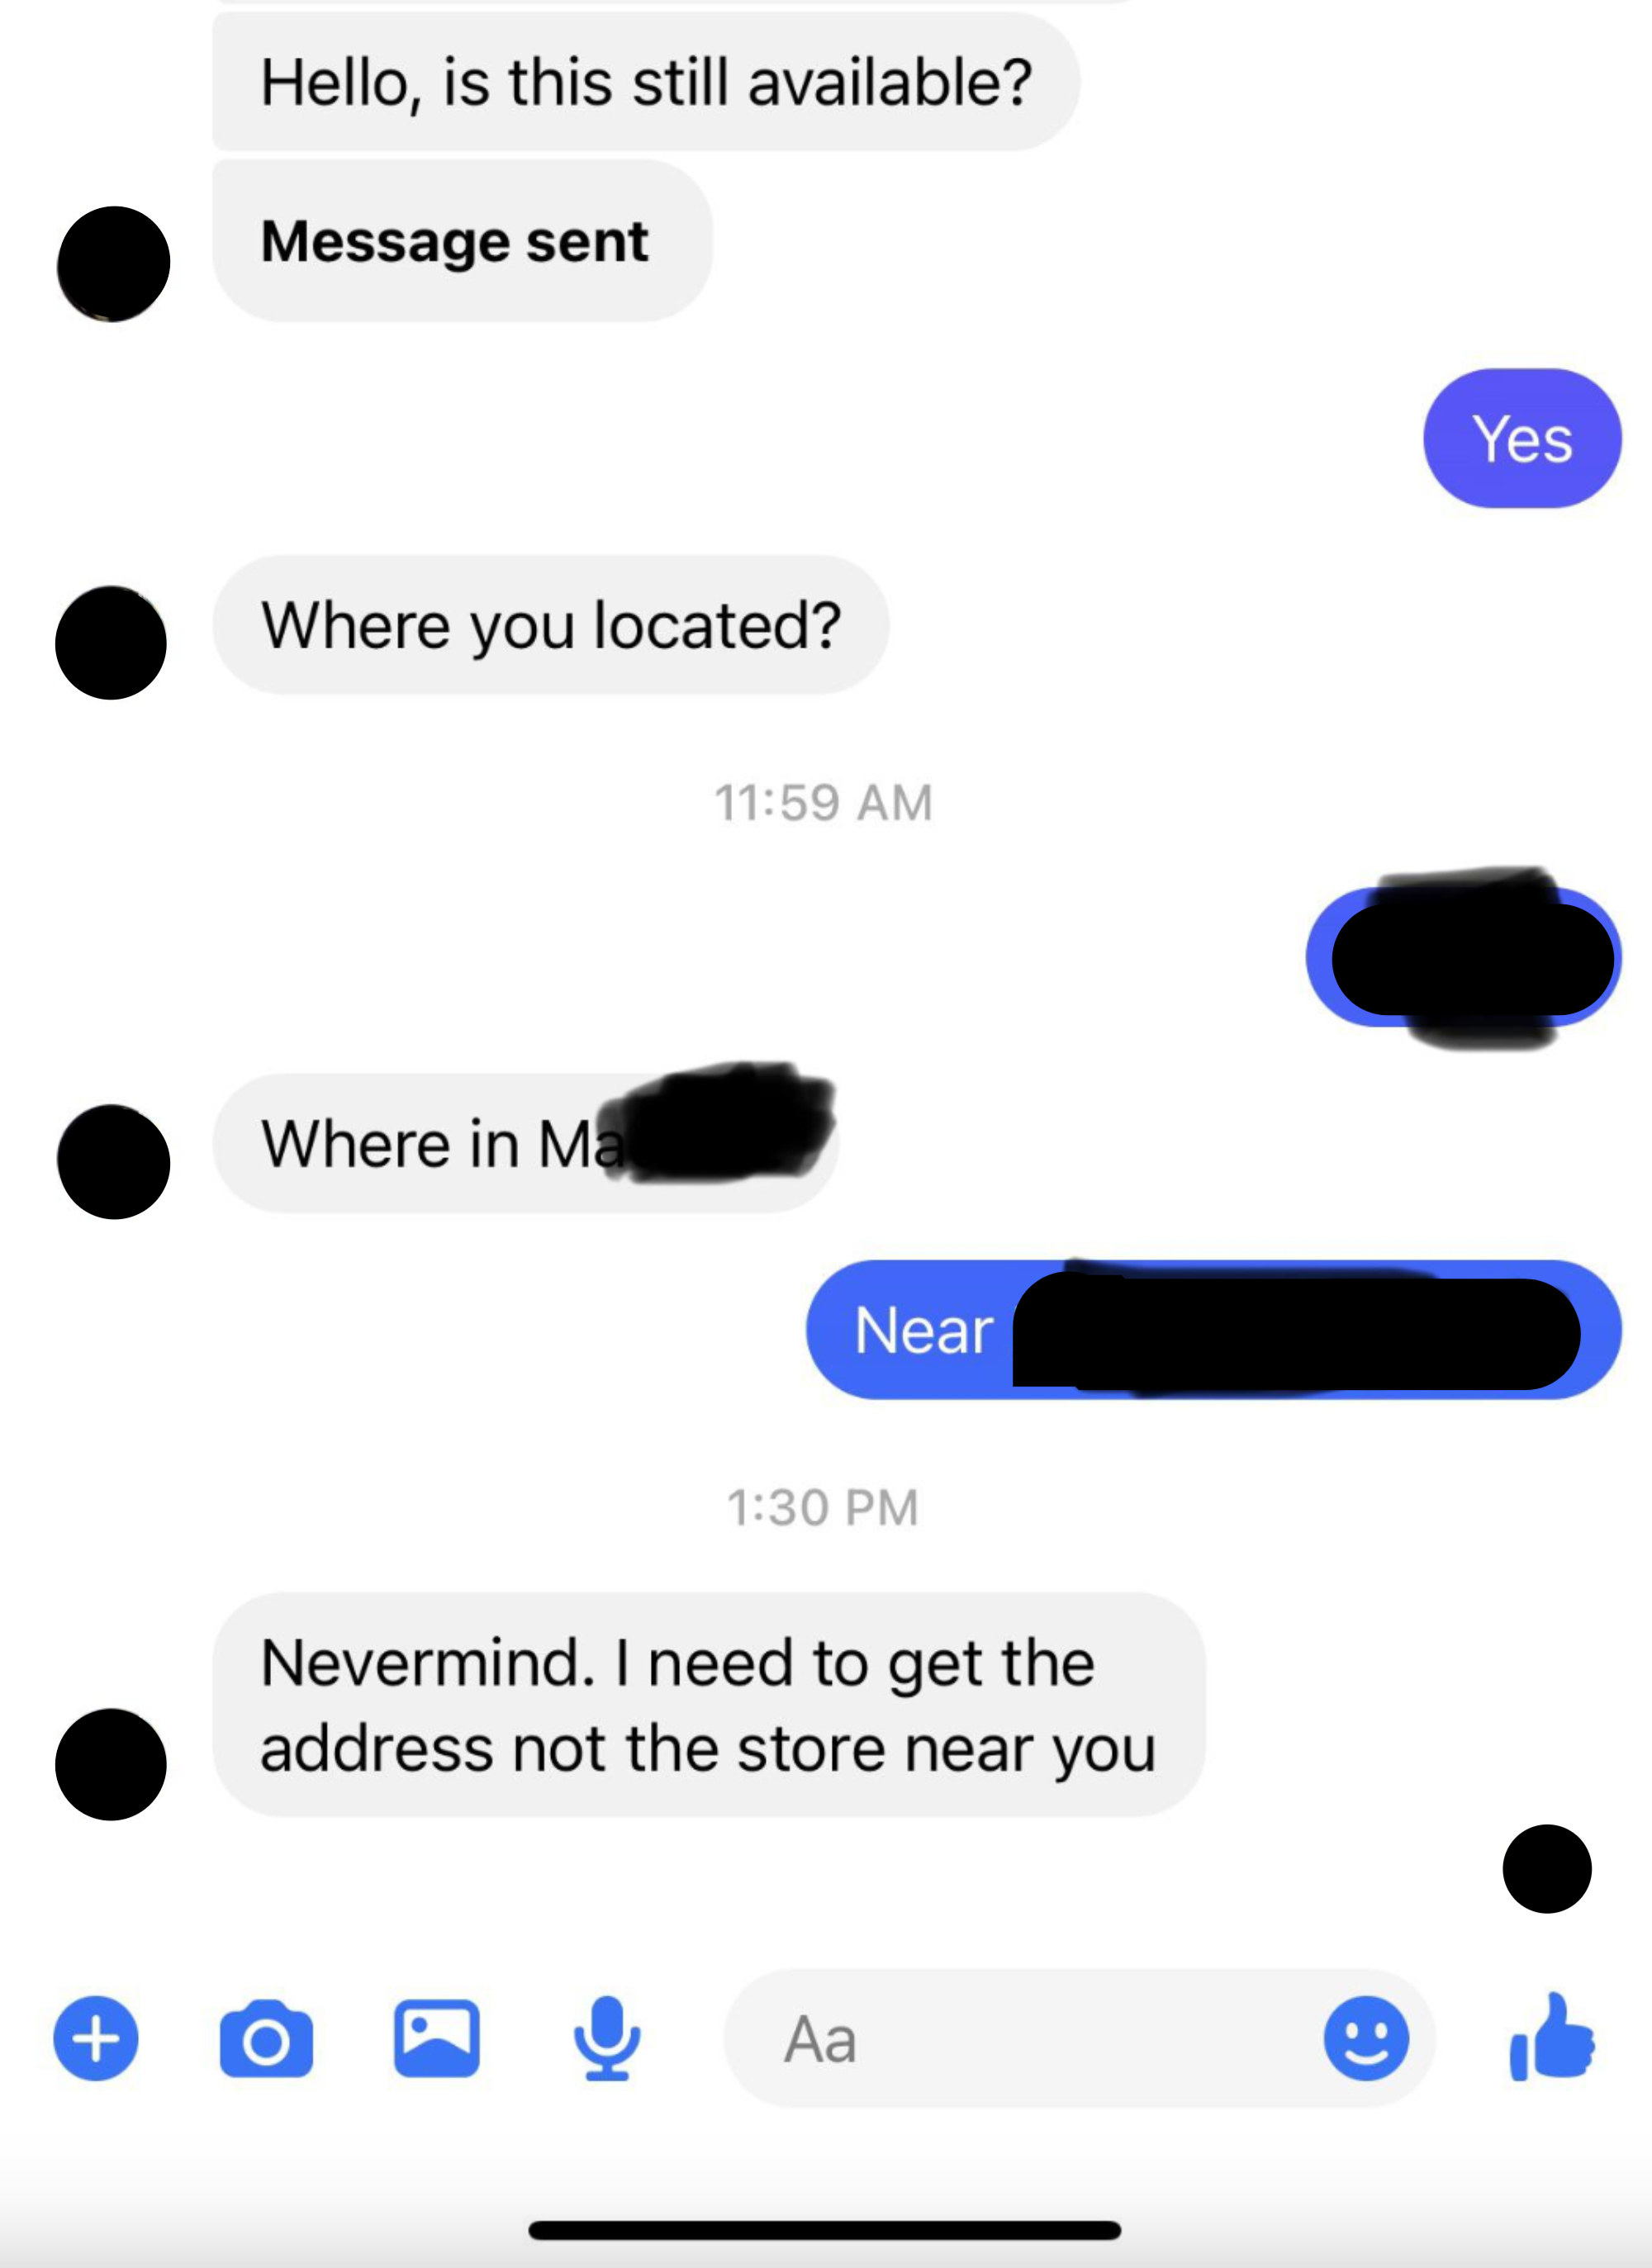 &quot;I need to get the address not a store near you&quot;